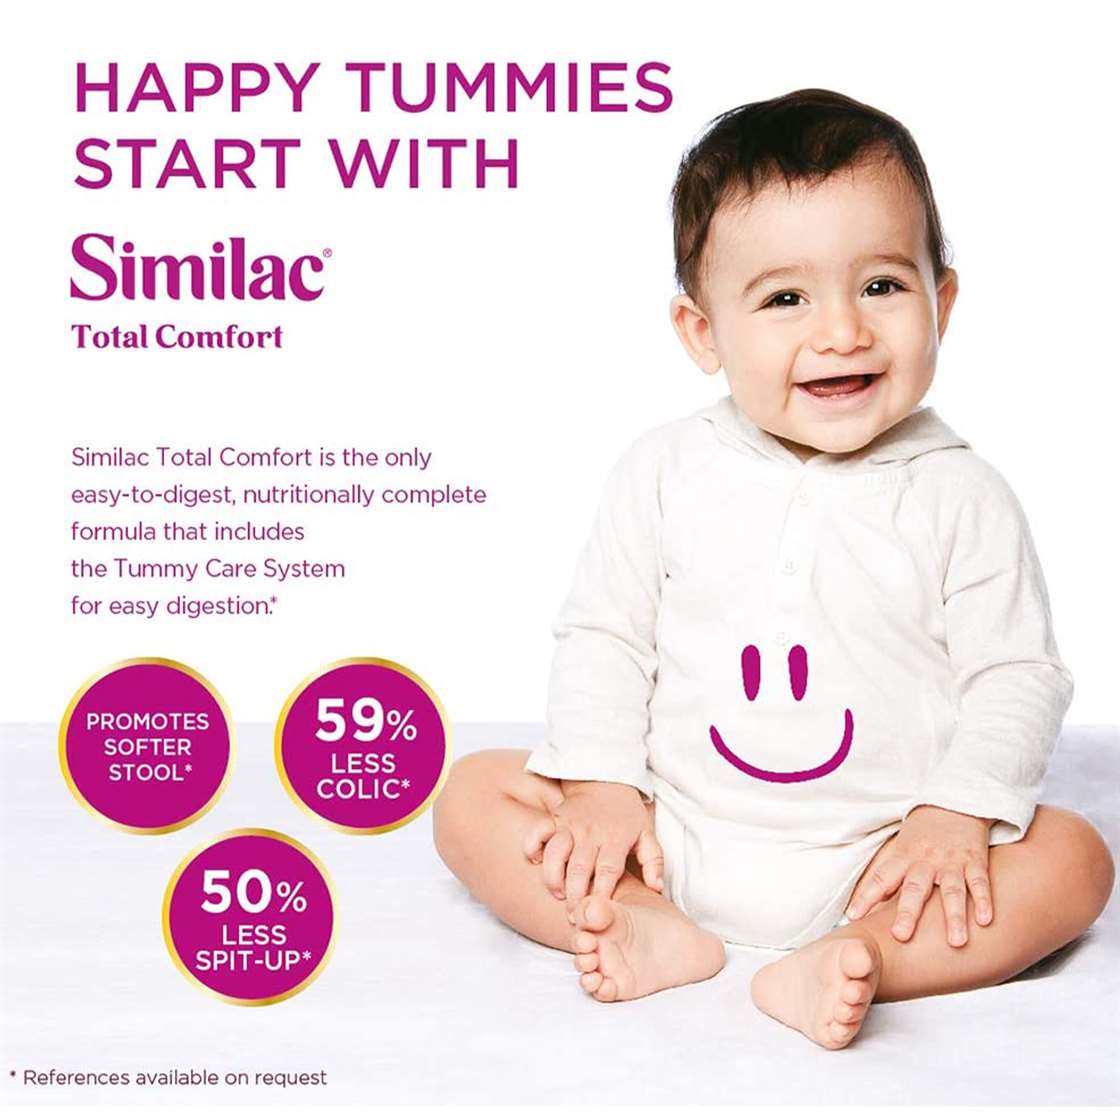 Buy Abbott Similac Total Comfort Gold Baby Milk Formula, Stage-2 - 360gms Online in India at uyyaala.com